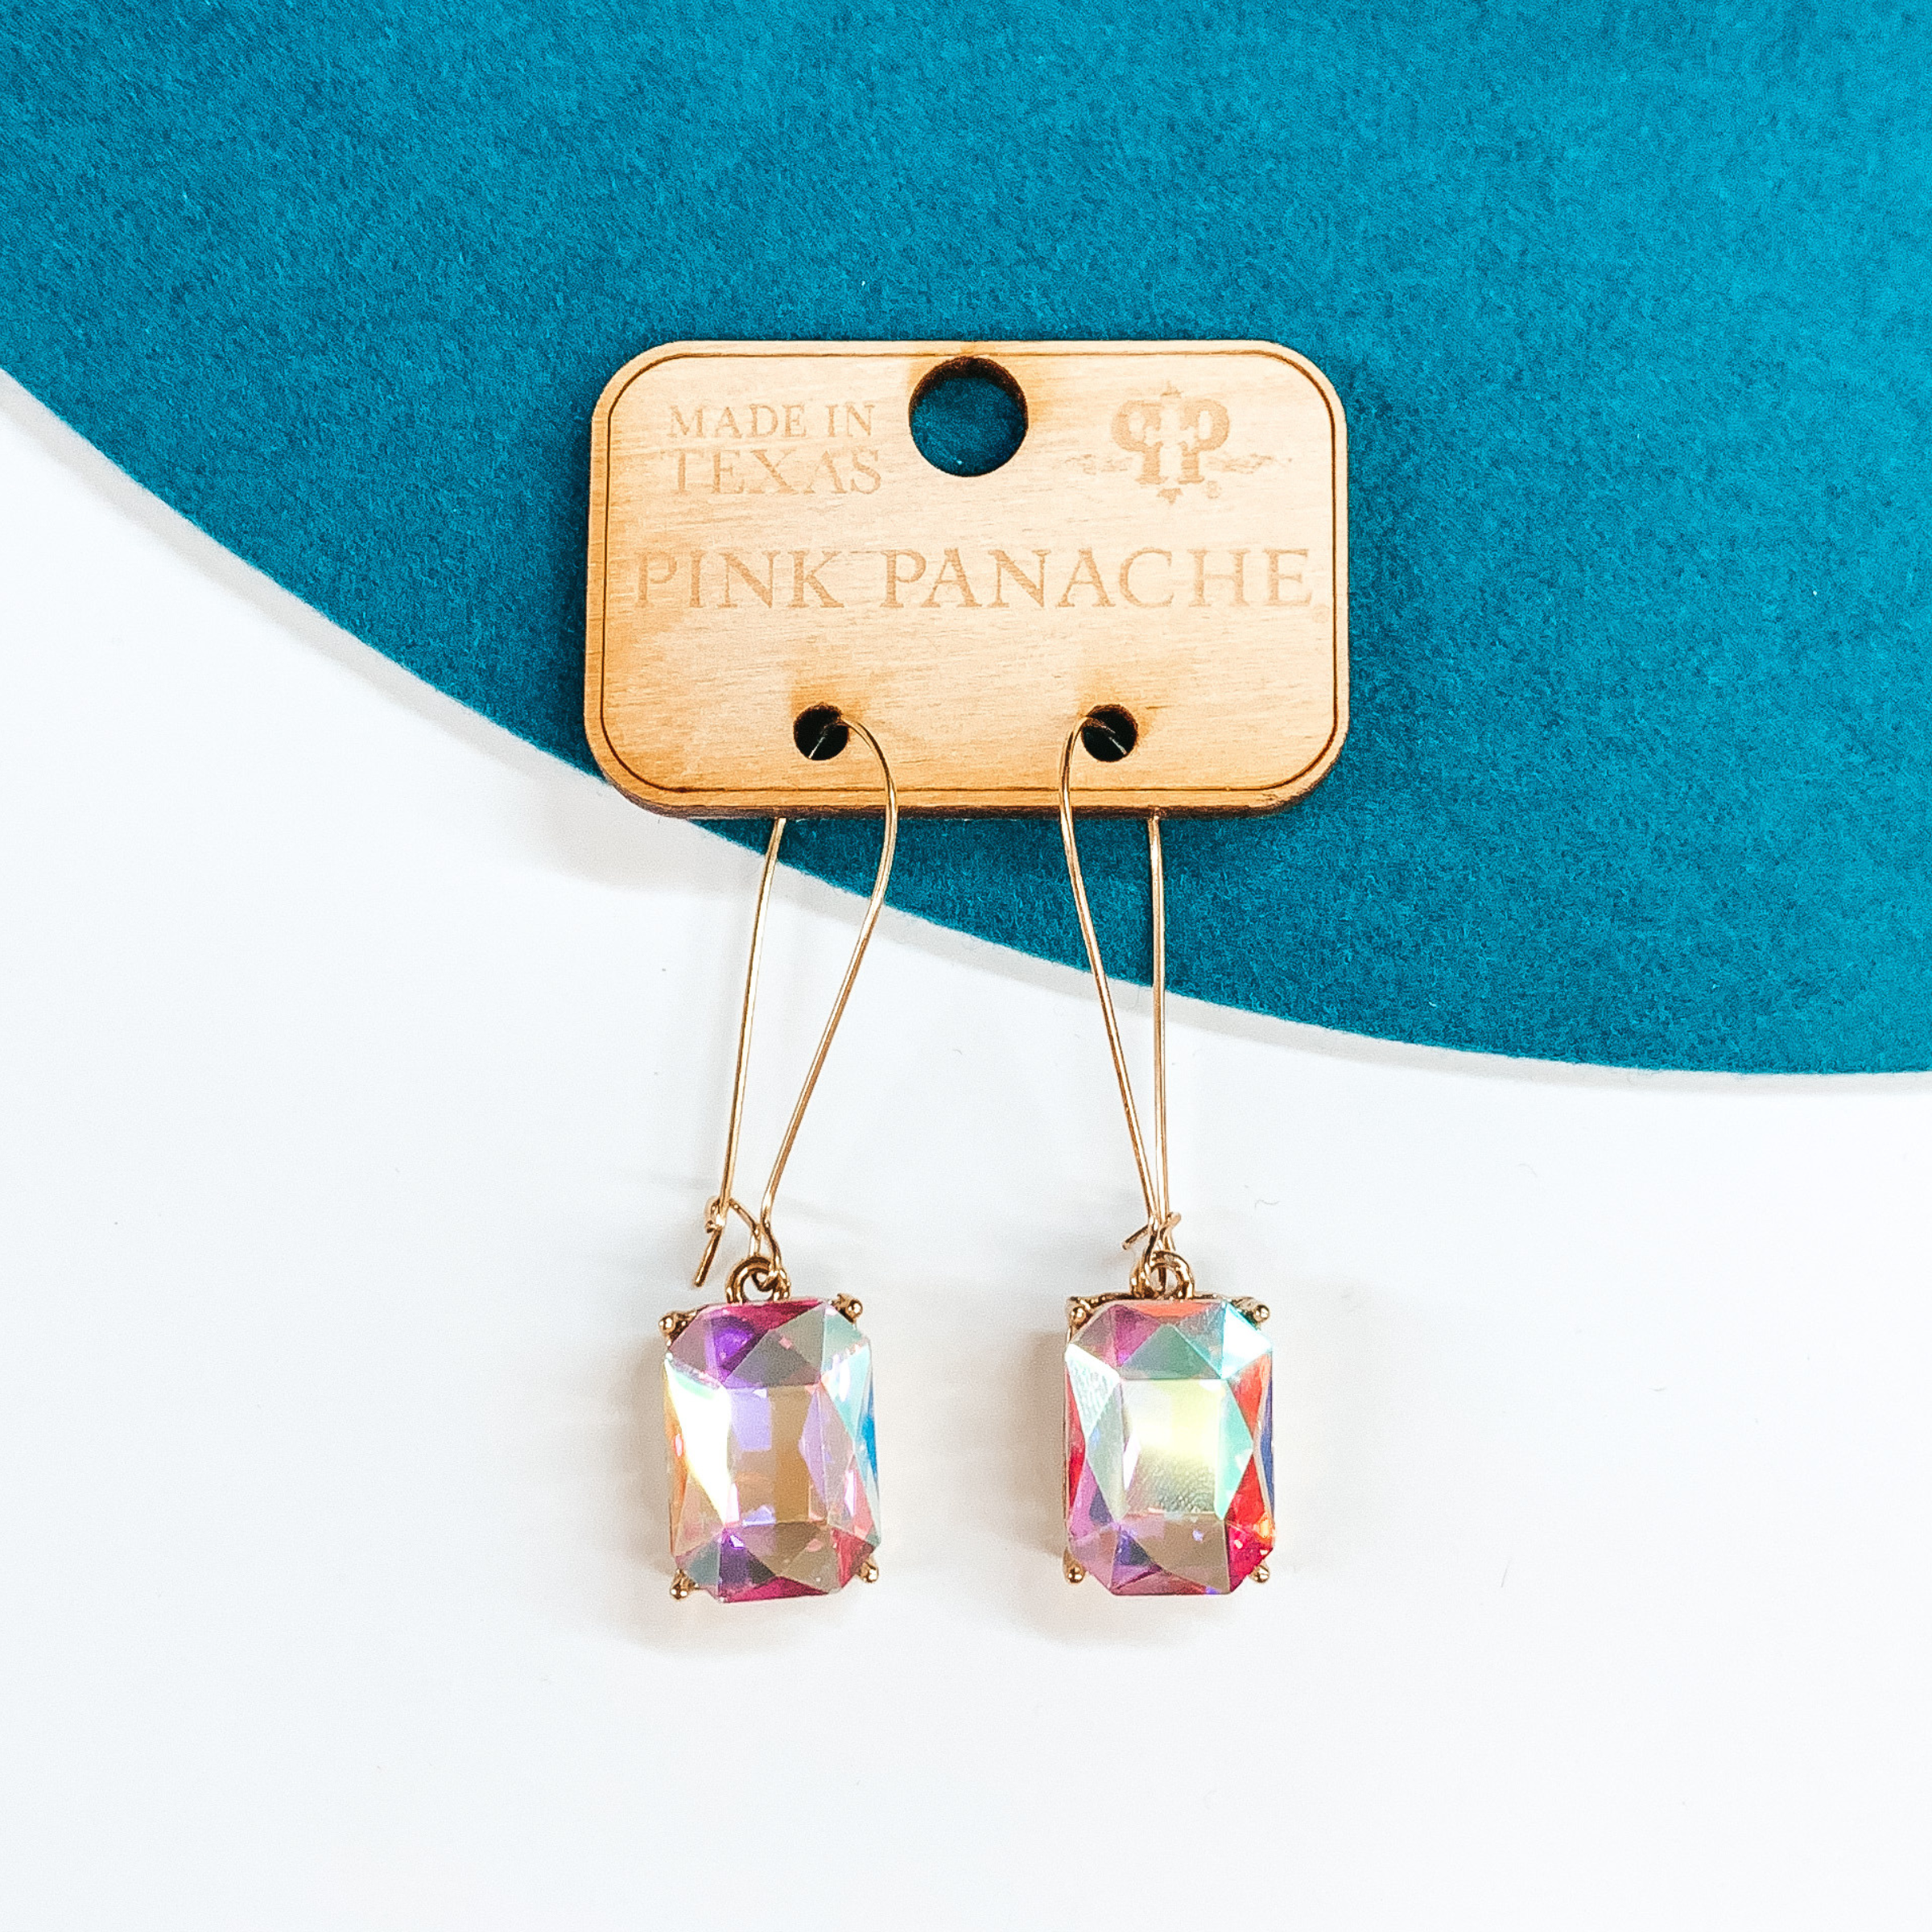 Gold kidney wire earrings with a hanging rectangle AB  crystal pendant. These earrings are pictured on a teal and white background.